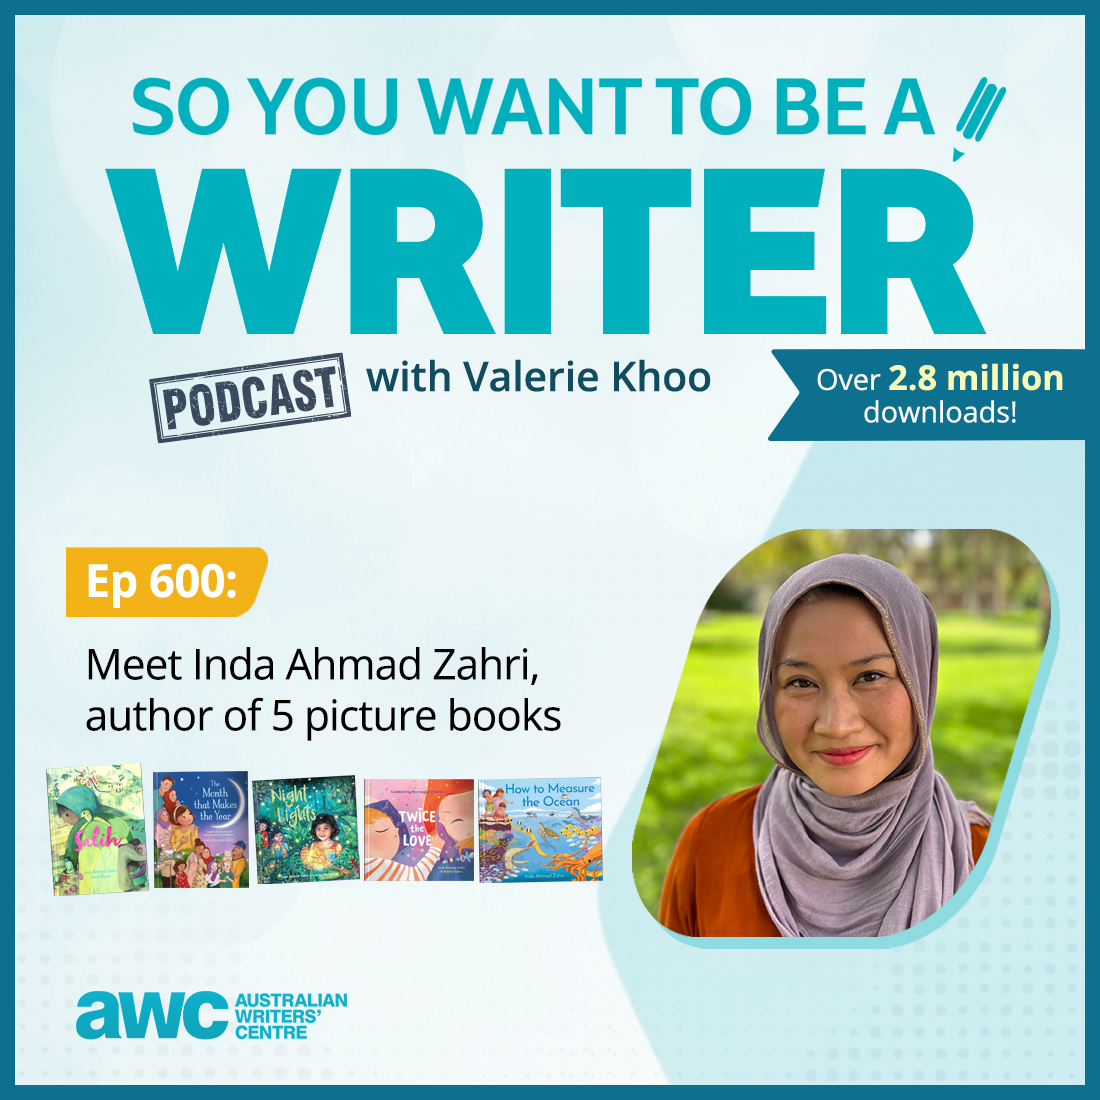 Meet Inda Ahmad Zahri, author of 5 picture books. Listen to the latest episode of ‘So You Want to be a Writer’ on your favourite podcast app, or follow the link: writerscentre.com.au/blog/ep-600/